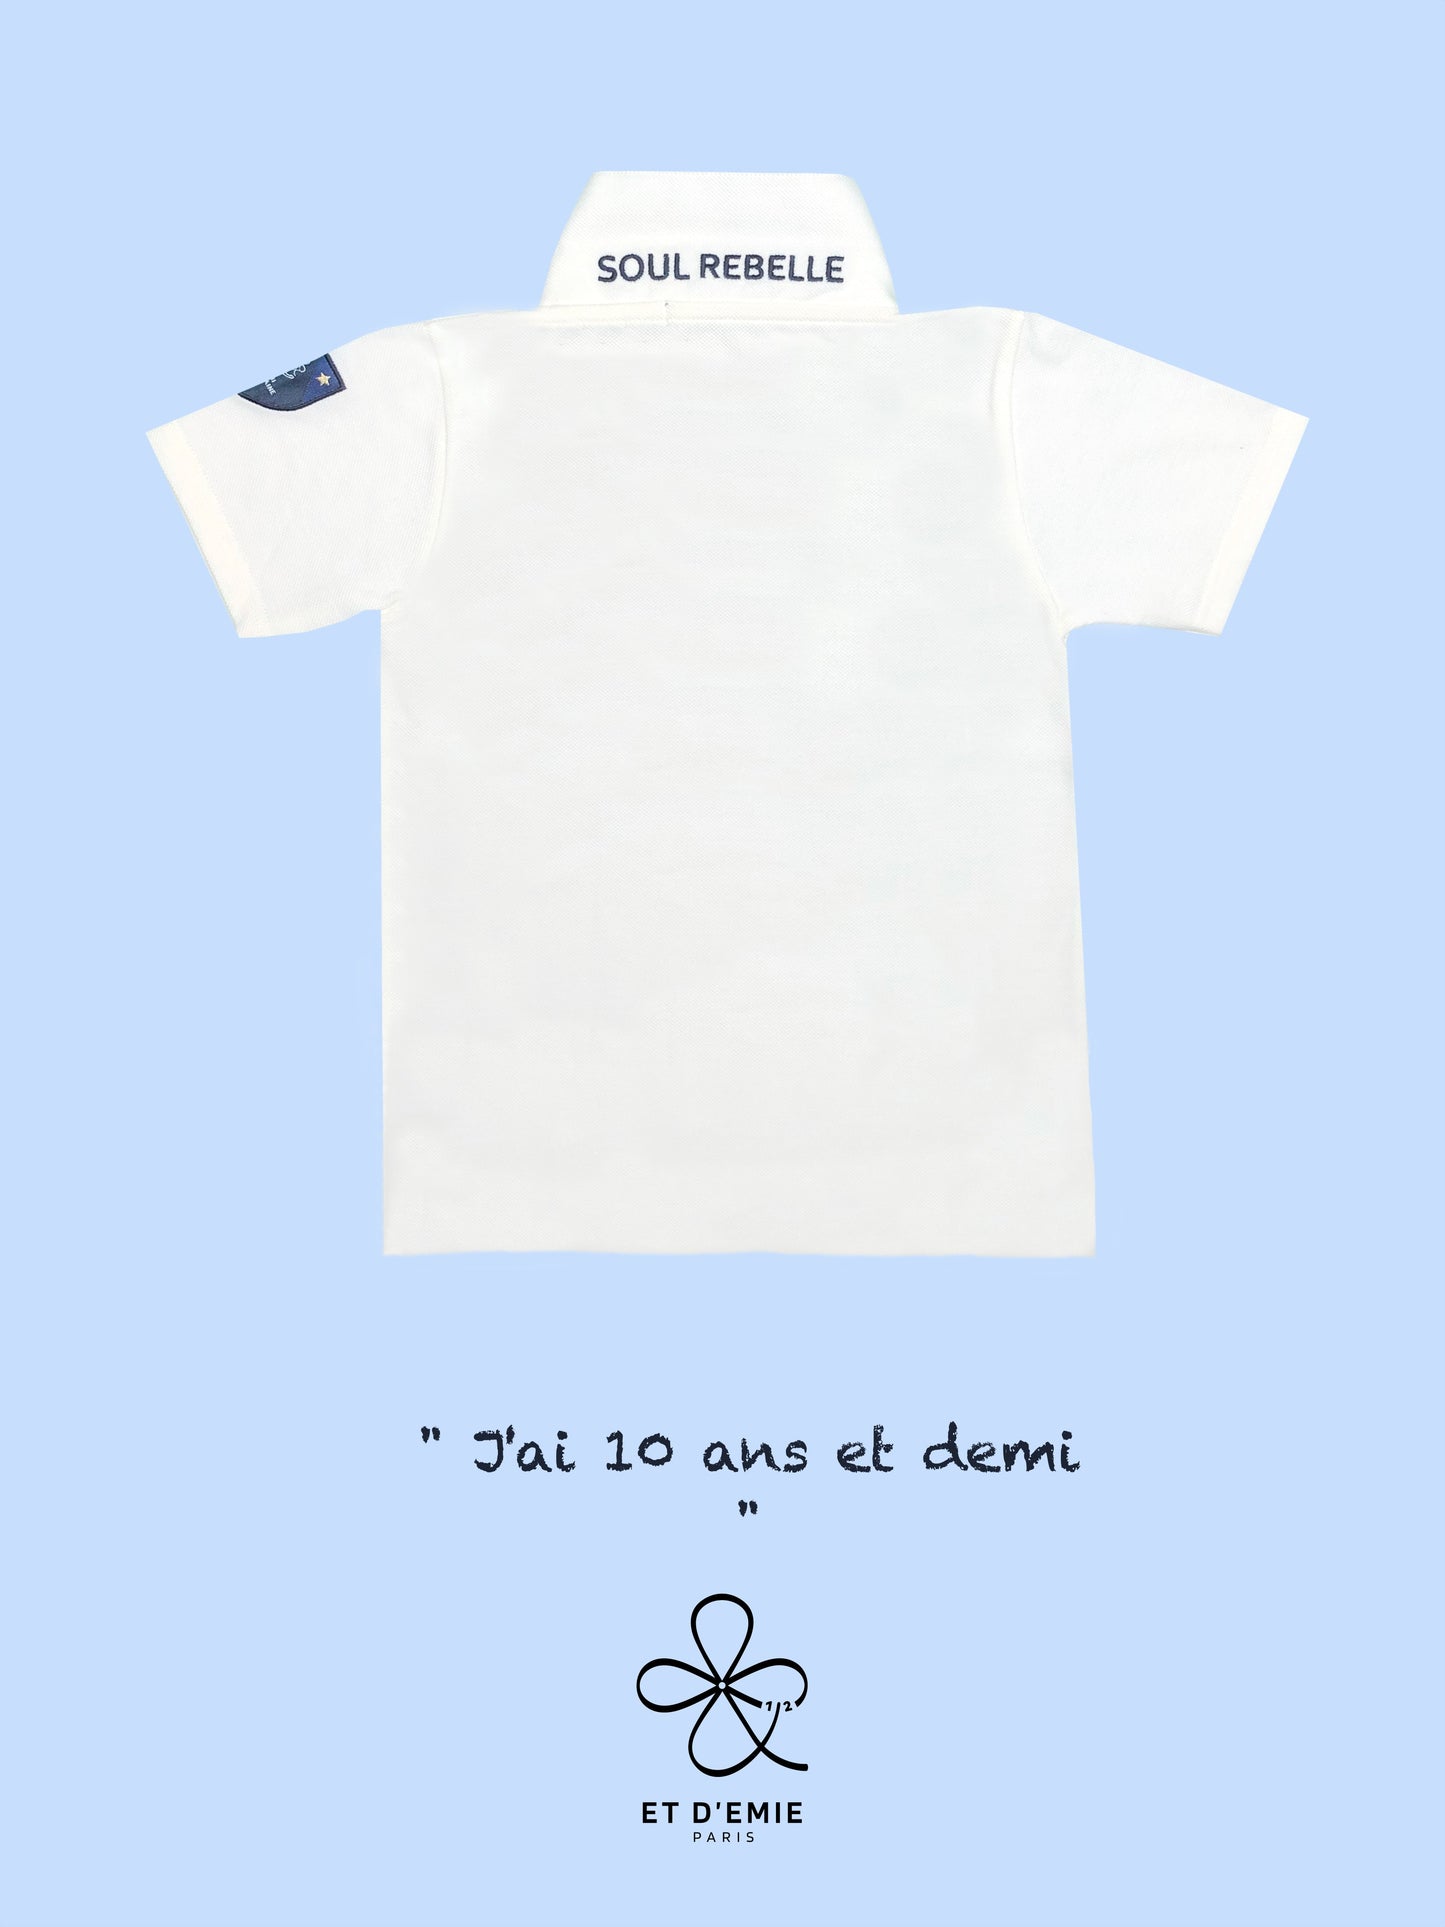 MINI CAPTAIN - SOUL REBELLE polo shirt "I'm 10 and a half years old" embroidered in ivory organic pique cotton🇫🇷